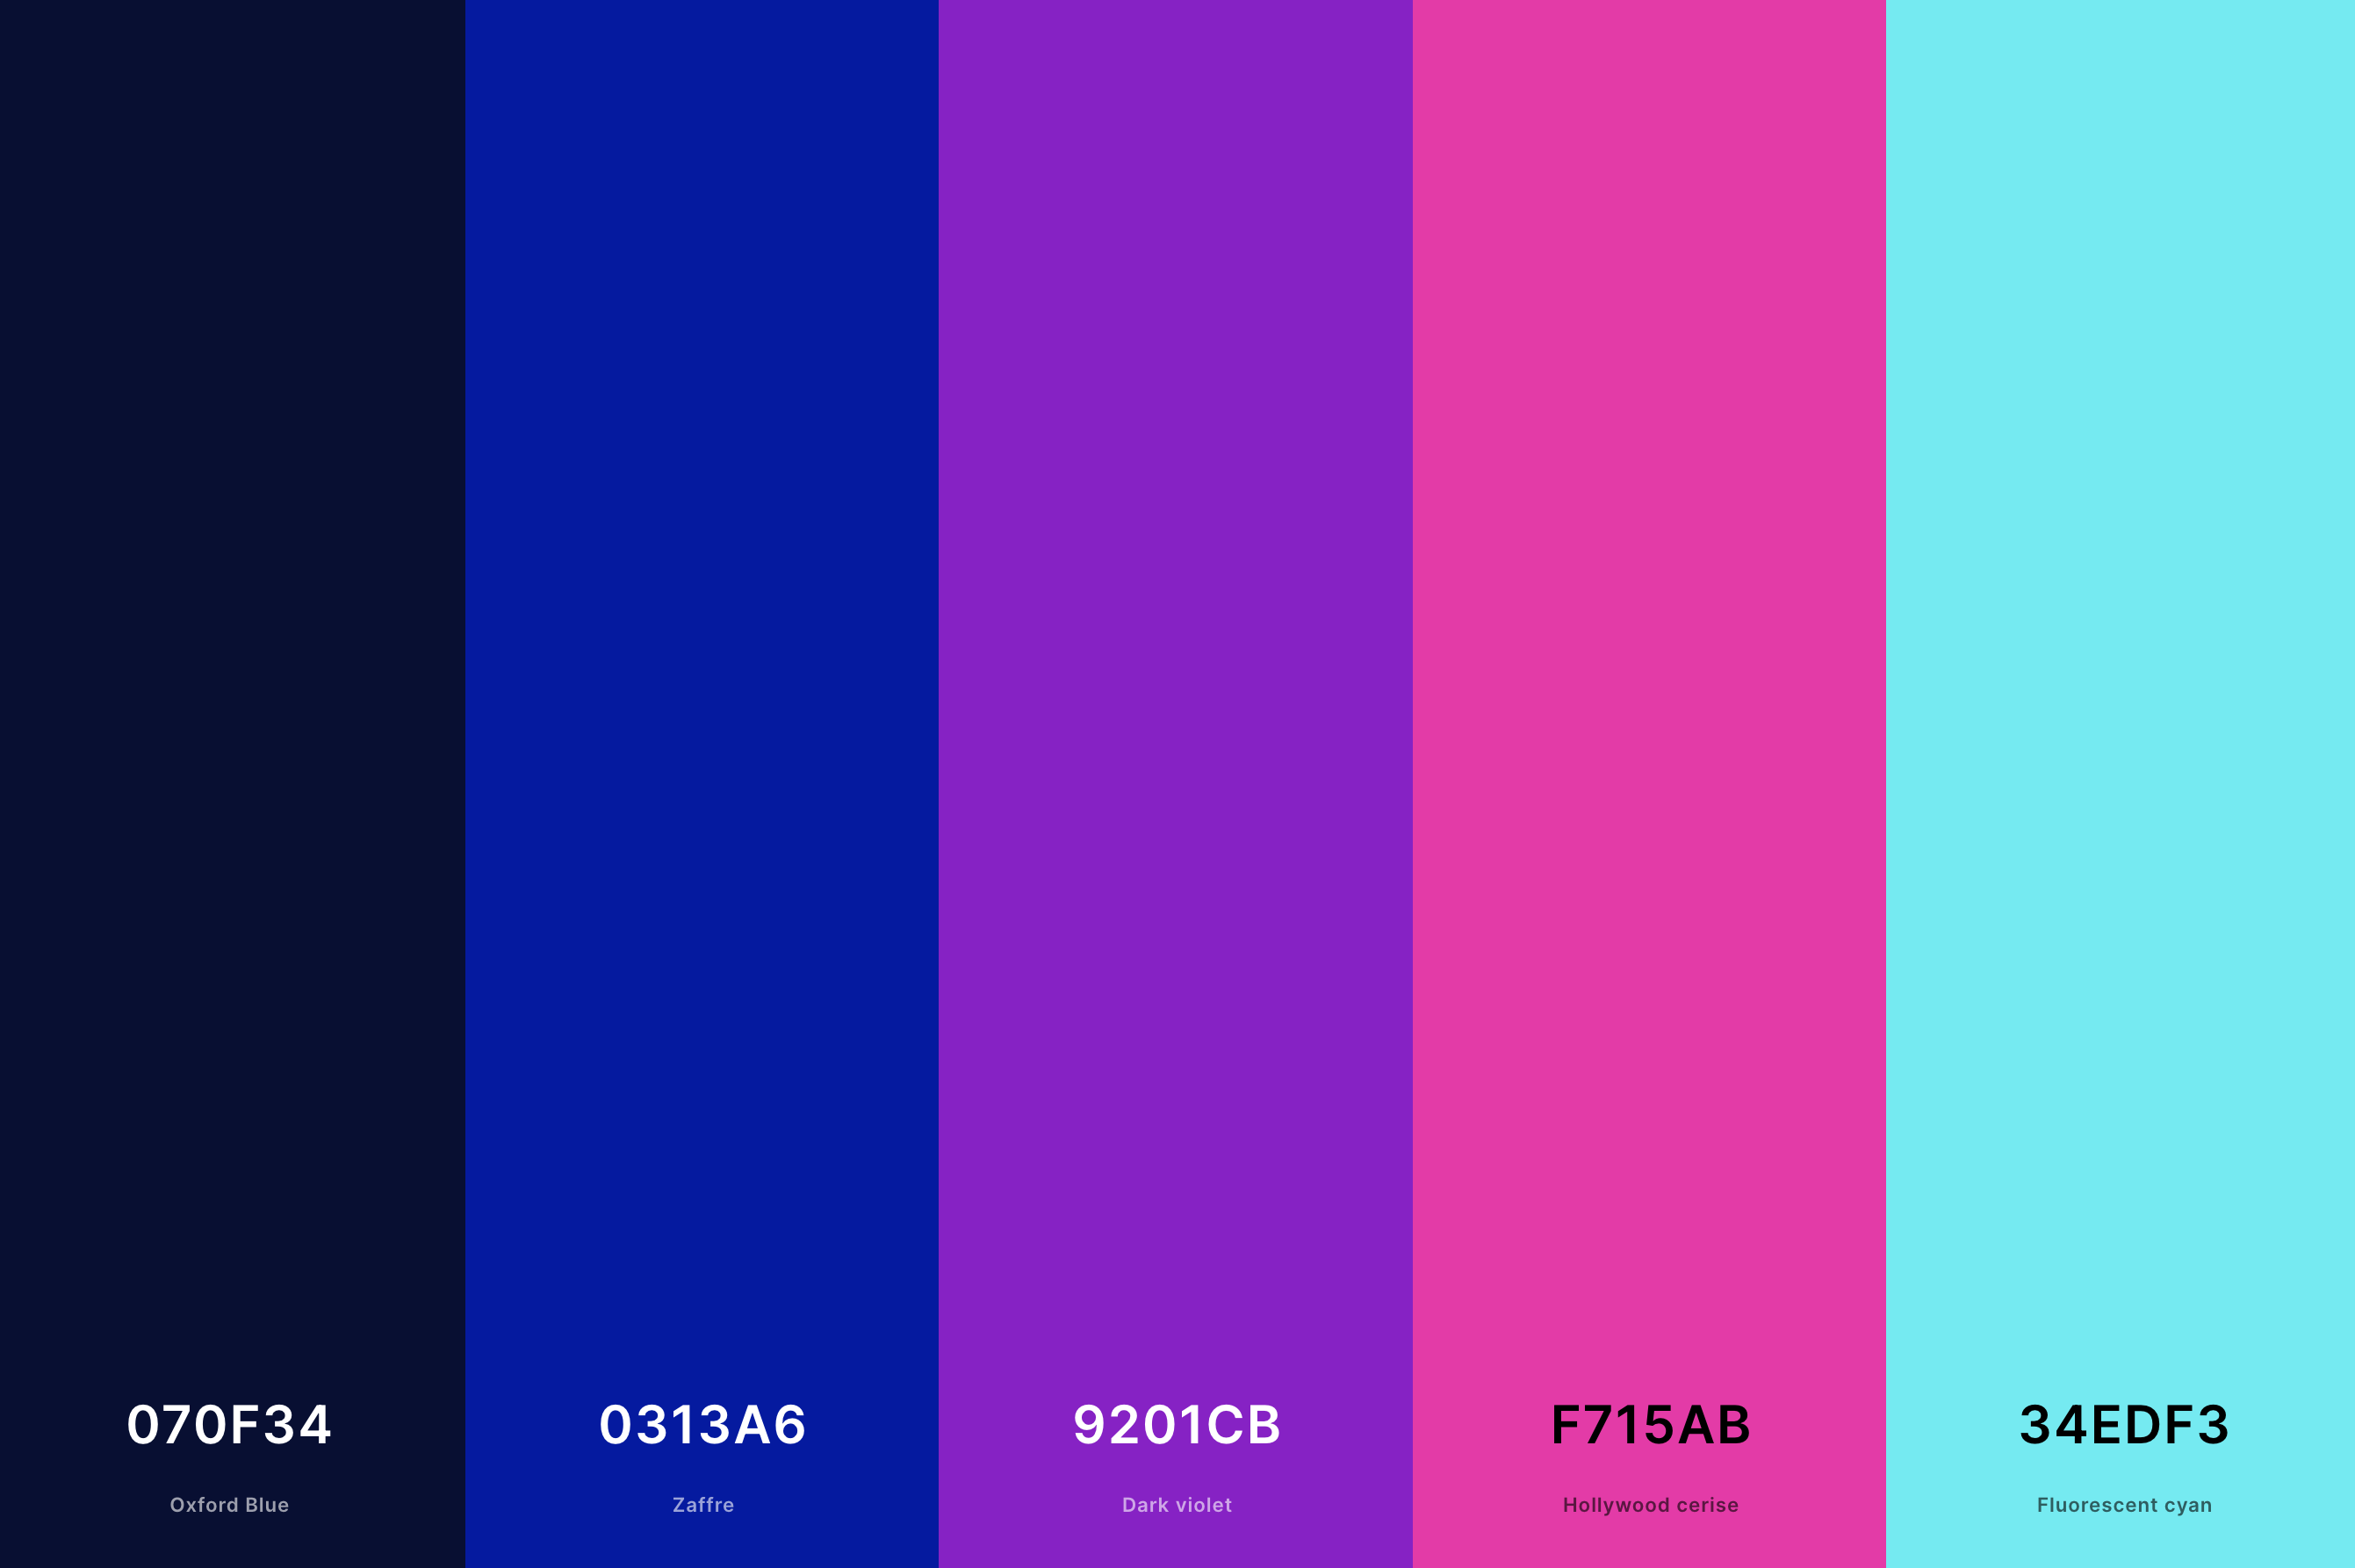 3. Cyberpunk Neon Color Palette Color Palette with Oxford Blue (Hex #070F34) + Zaffre (Hex #0313A6) + Dark Violet (Hex #9201CB) + Hollywood Cerise (Hex #F715AB) + Fluorescent Cyan (Hex #34EDF3) Color Palette with Hex Codes